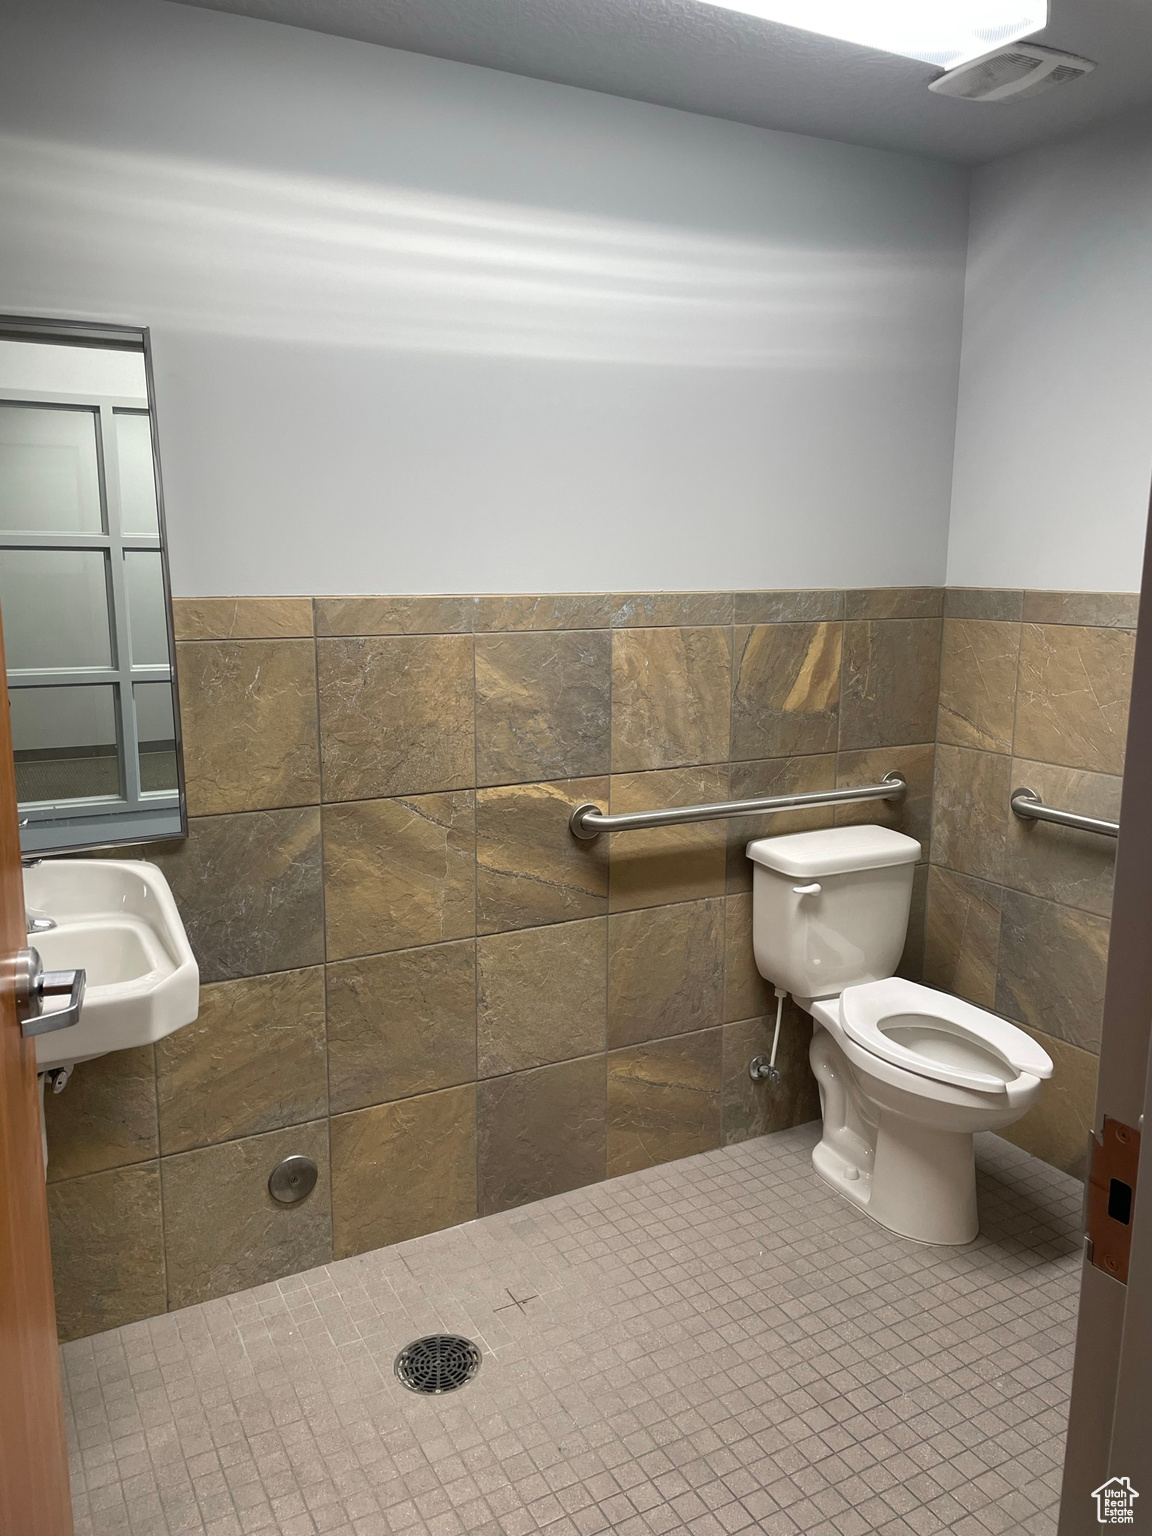 Bathroom with tile floors, a shower, tile walls, and toilet